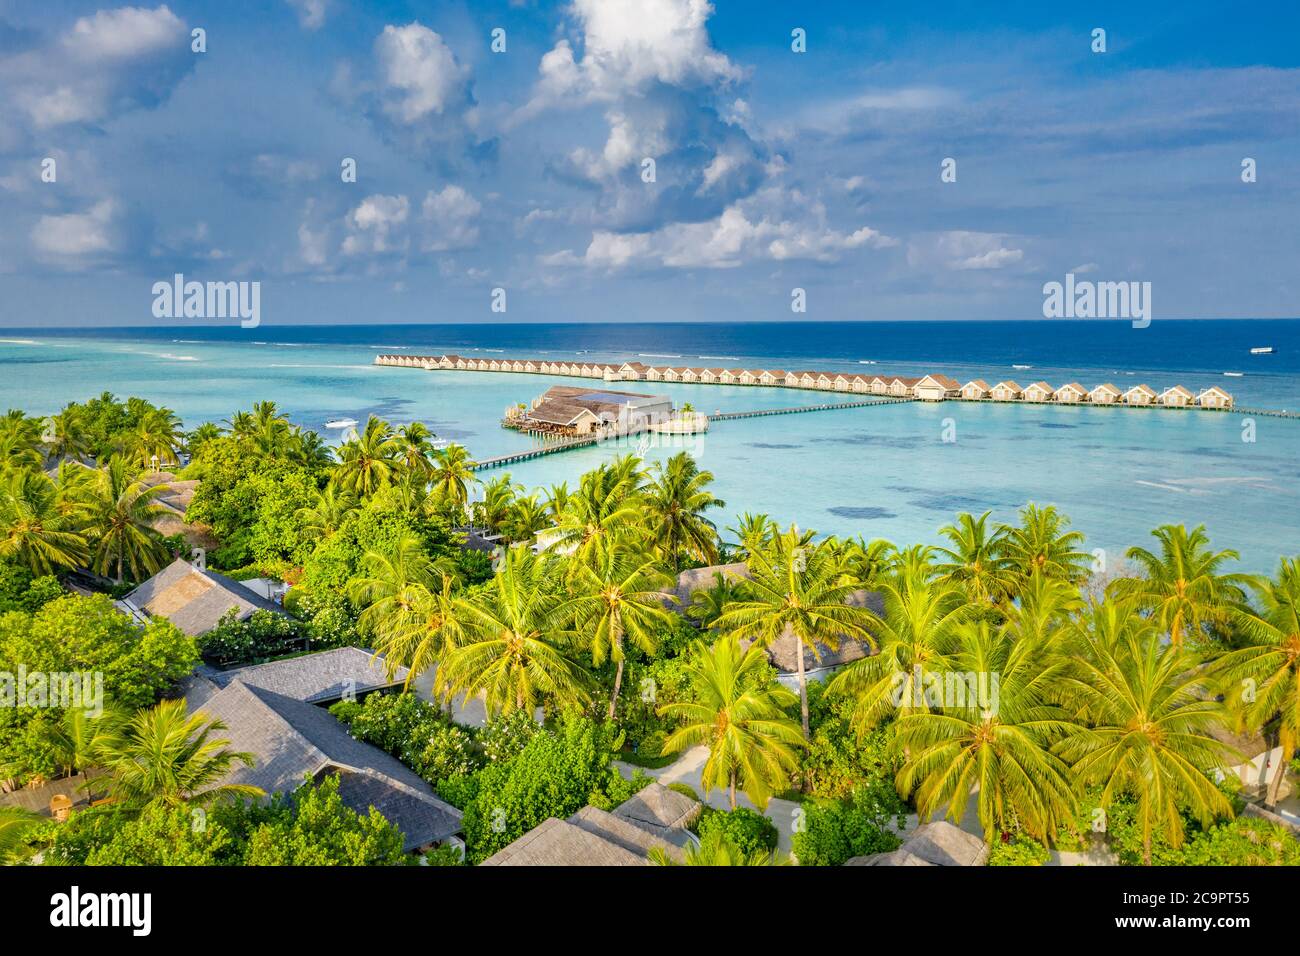 Aerial landscape, luxury tropical resort or hotel with water villas and beautiful beach scenery. Amazing bird eyes view in Maldives landscape seascape Stock Photo